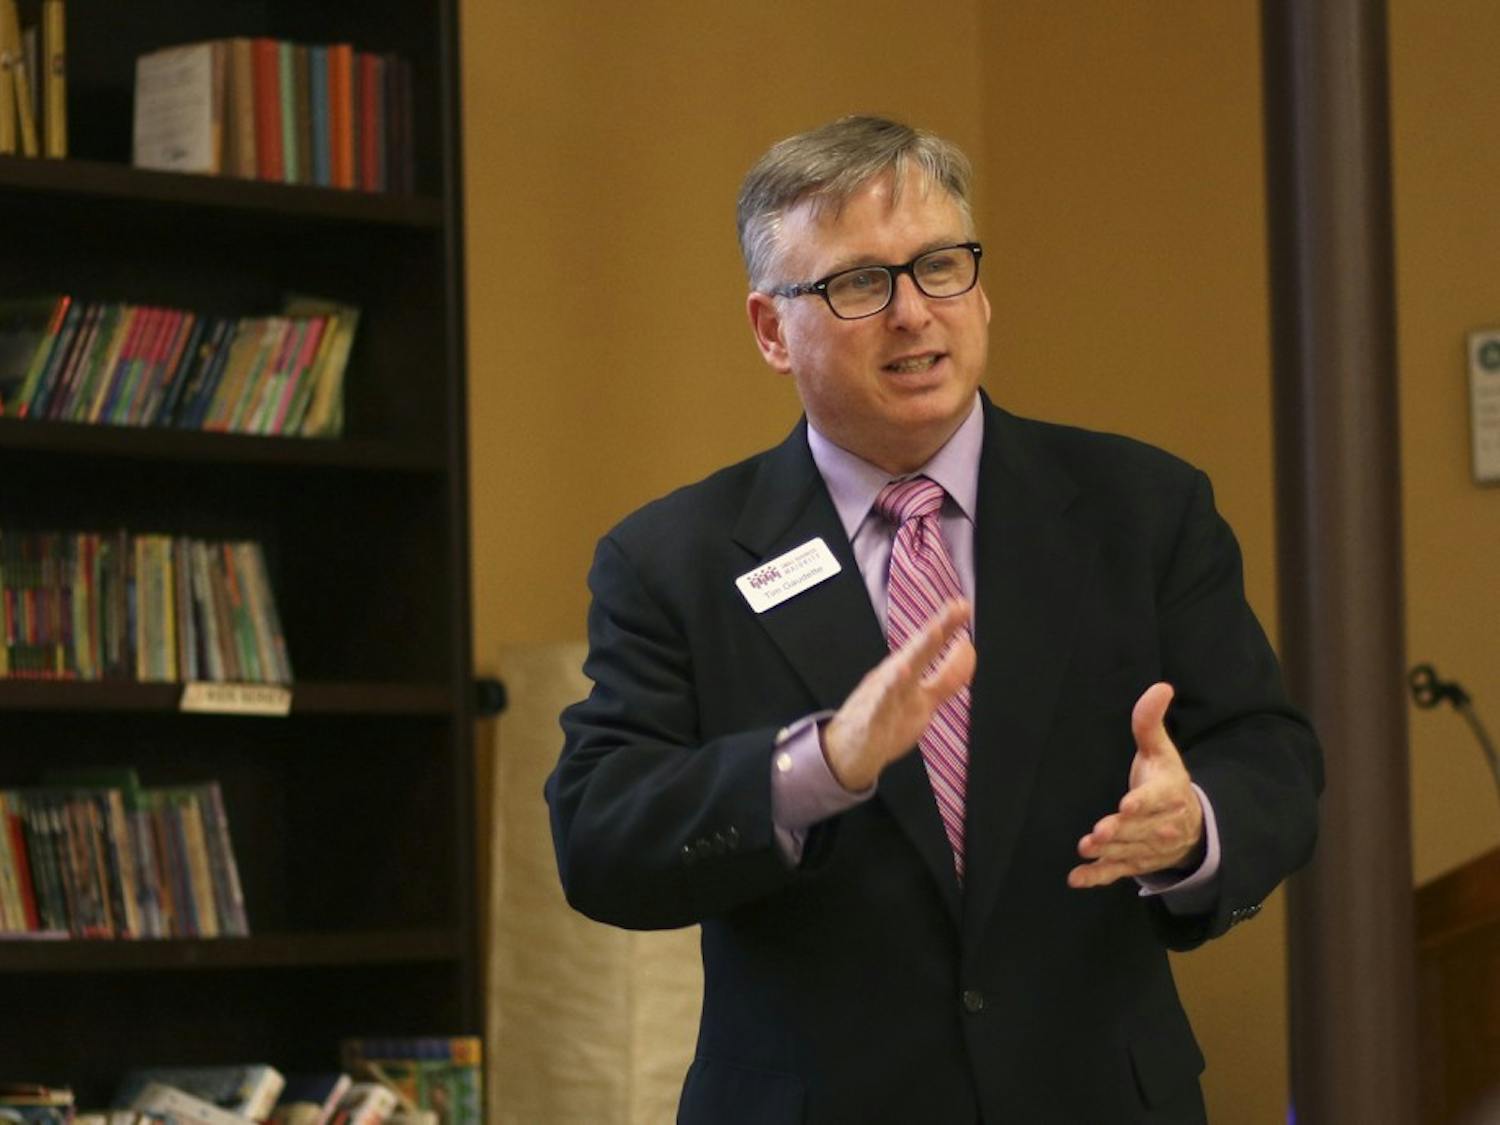 Tim Gaudette, an outreach manager of Small Business Majority, gave a presentation to a round-table of Chapel Hill and Carrboro small business owners at Flyleaf Books.